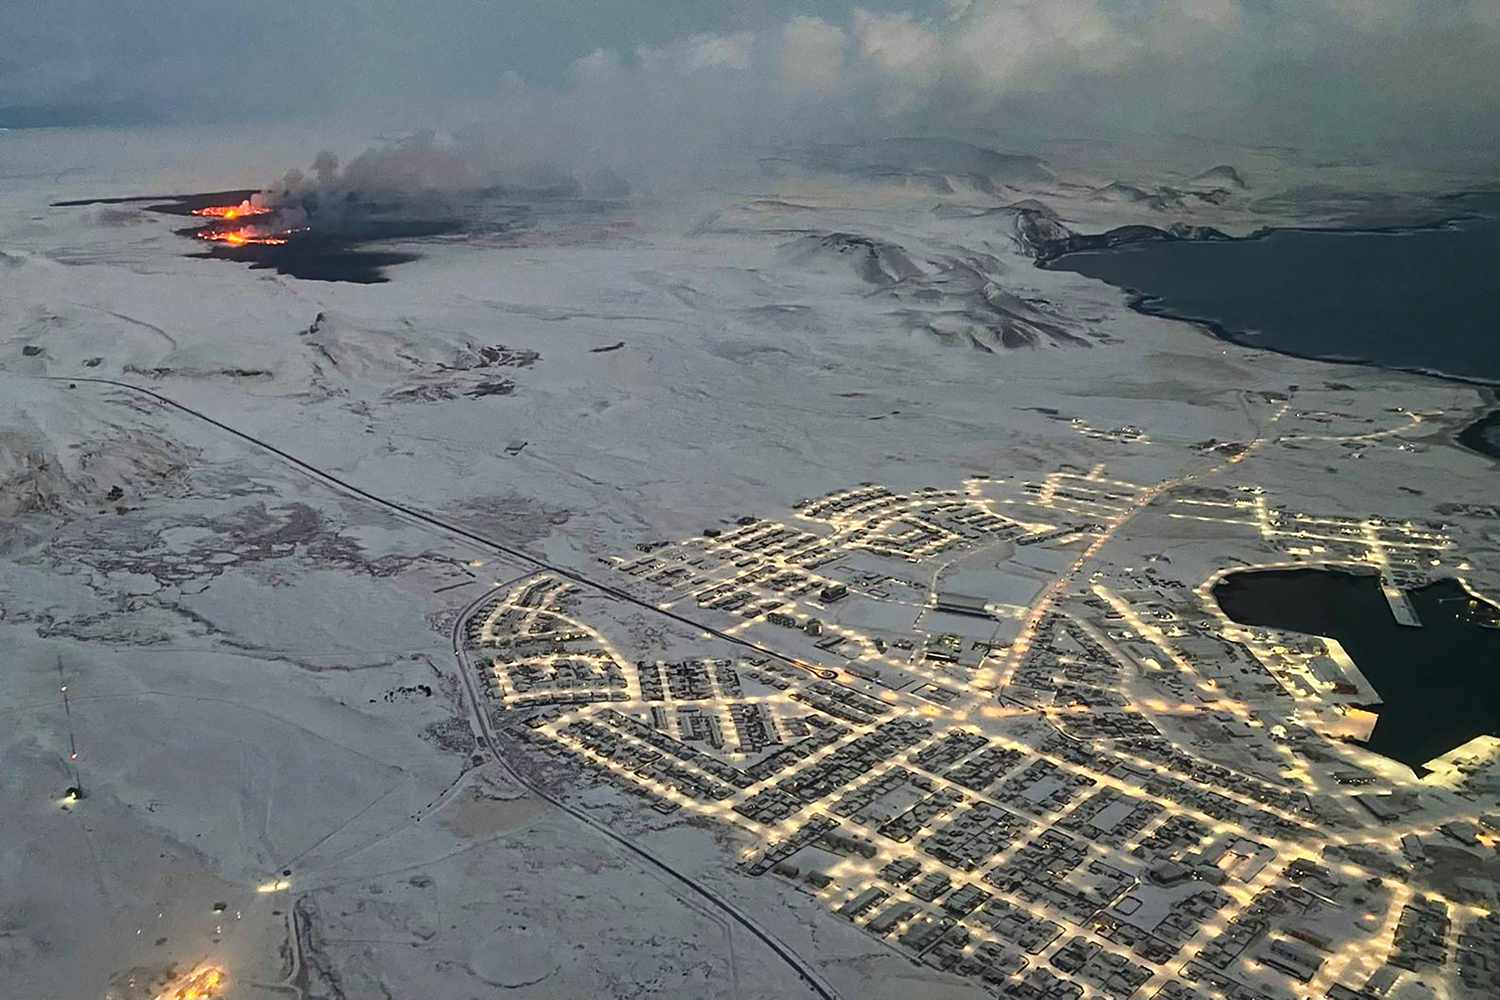 The evacuated Icelandic town of Grindavik (R) is seen as smoke billow and lava is thrown into the air from a fissure during a volcanic eruption on the Reykjanes peninsula 3 km north of Grindavik, western Iceland on December 19, 2023. A volcanic eruption began on Monday night in Iceland, south of the capital Reykjavik, following an earthquake swarm, Iceland's Meteorological Office reported. 